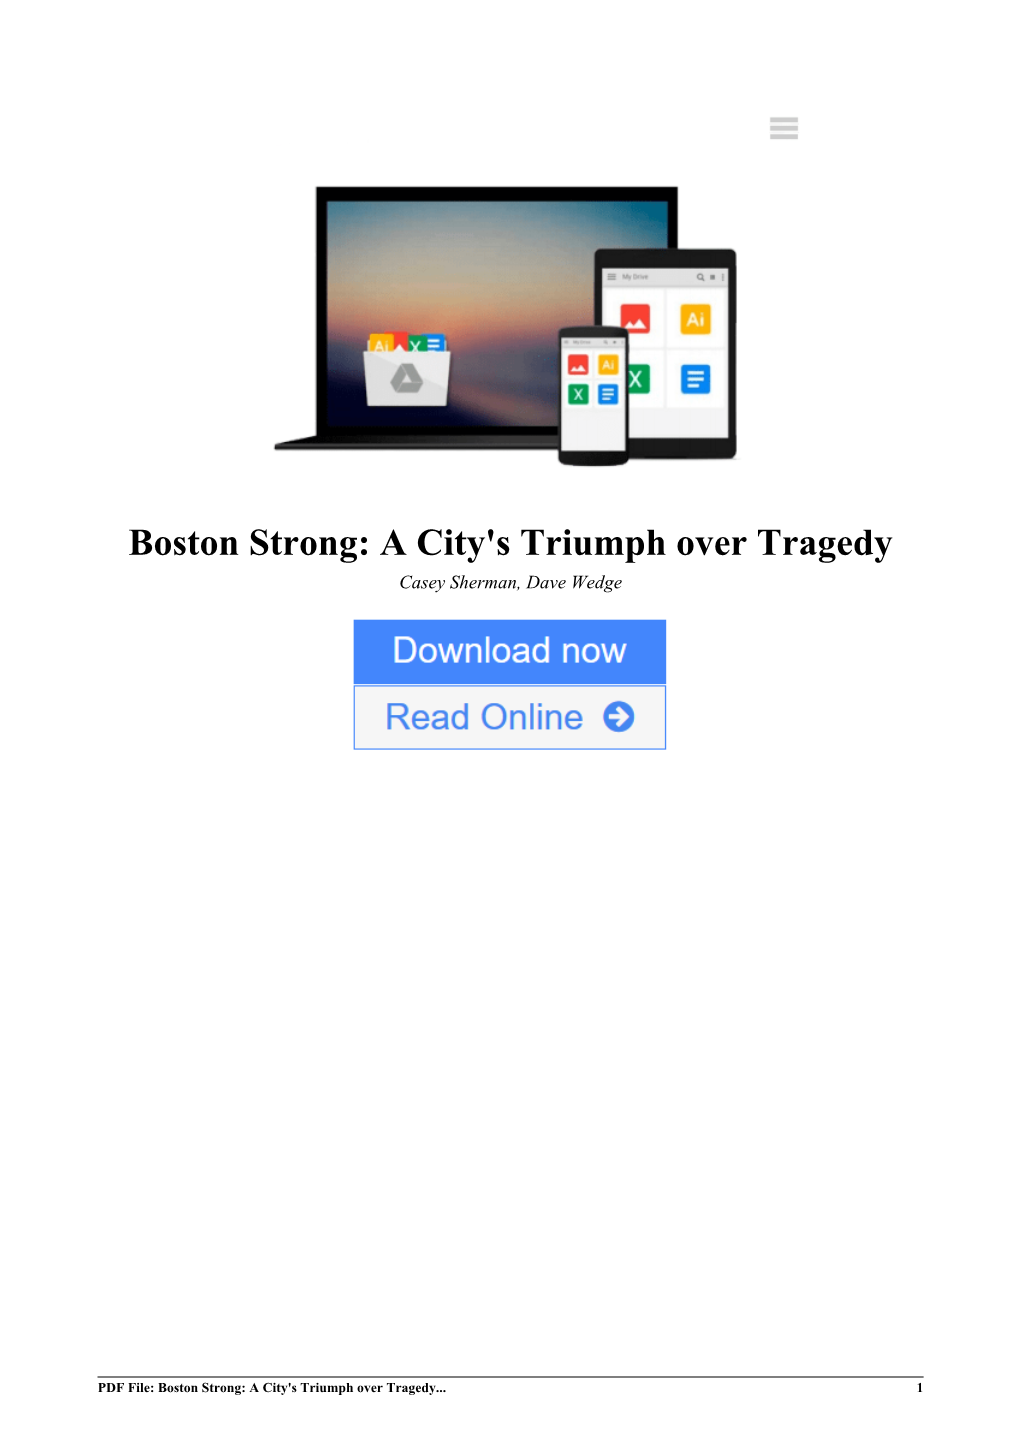 [NGRB]⋙ Boston Strong: a City's Triumph Over Tragedy by Casey